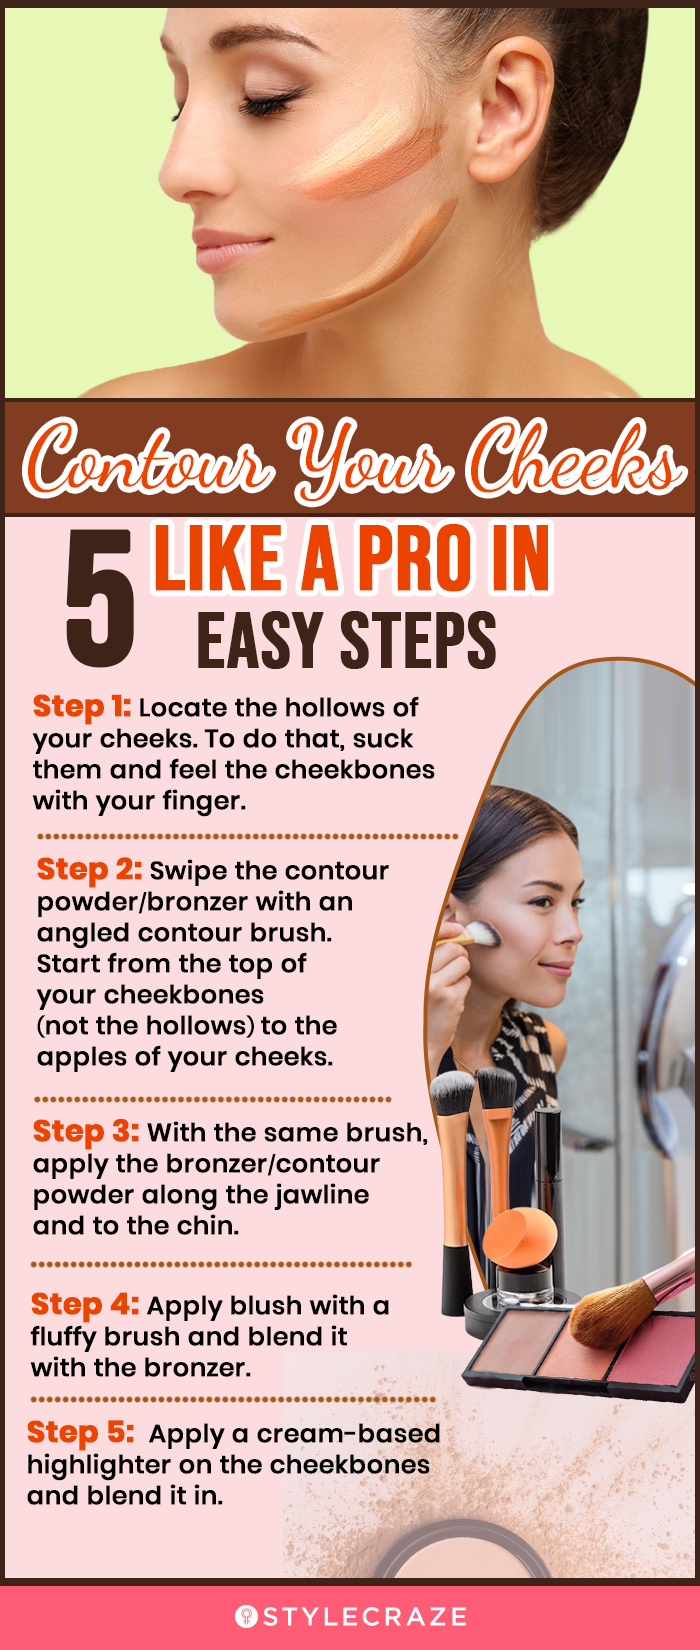 contour your cheeks like a pro in 5 easy steps (infographic)